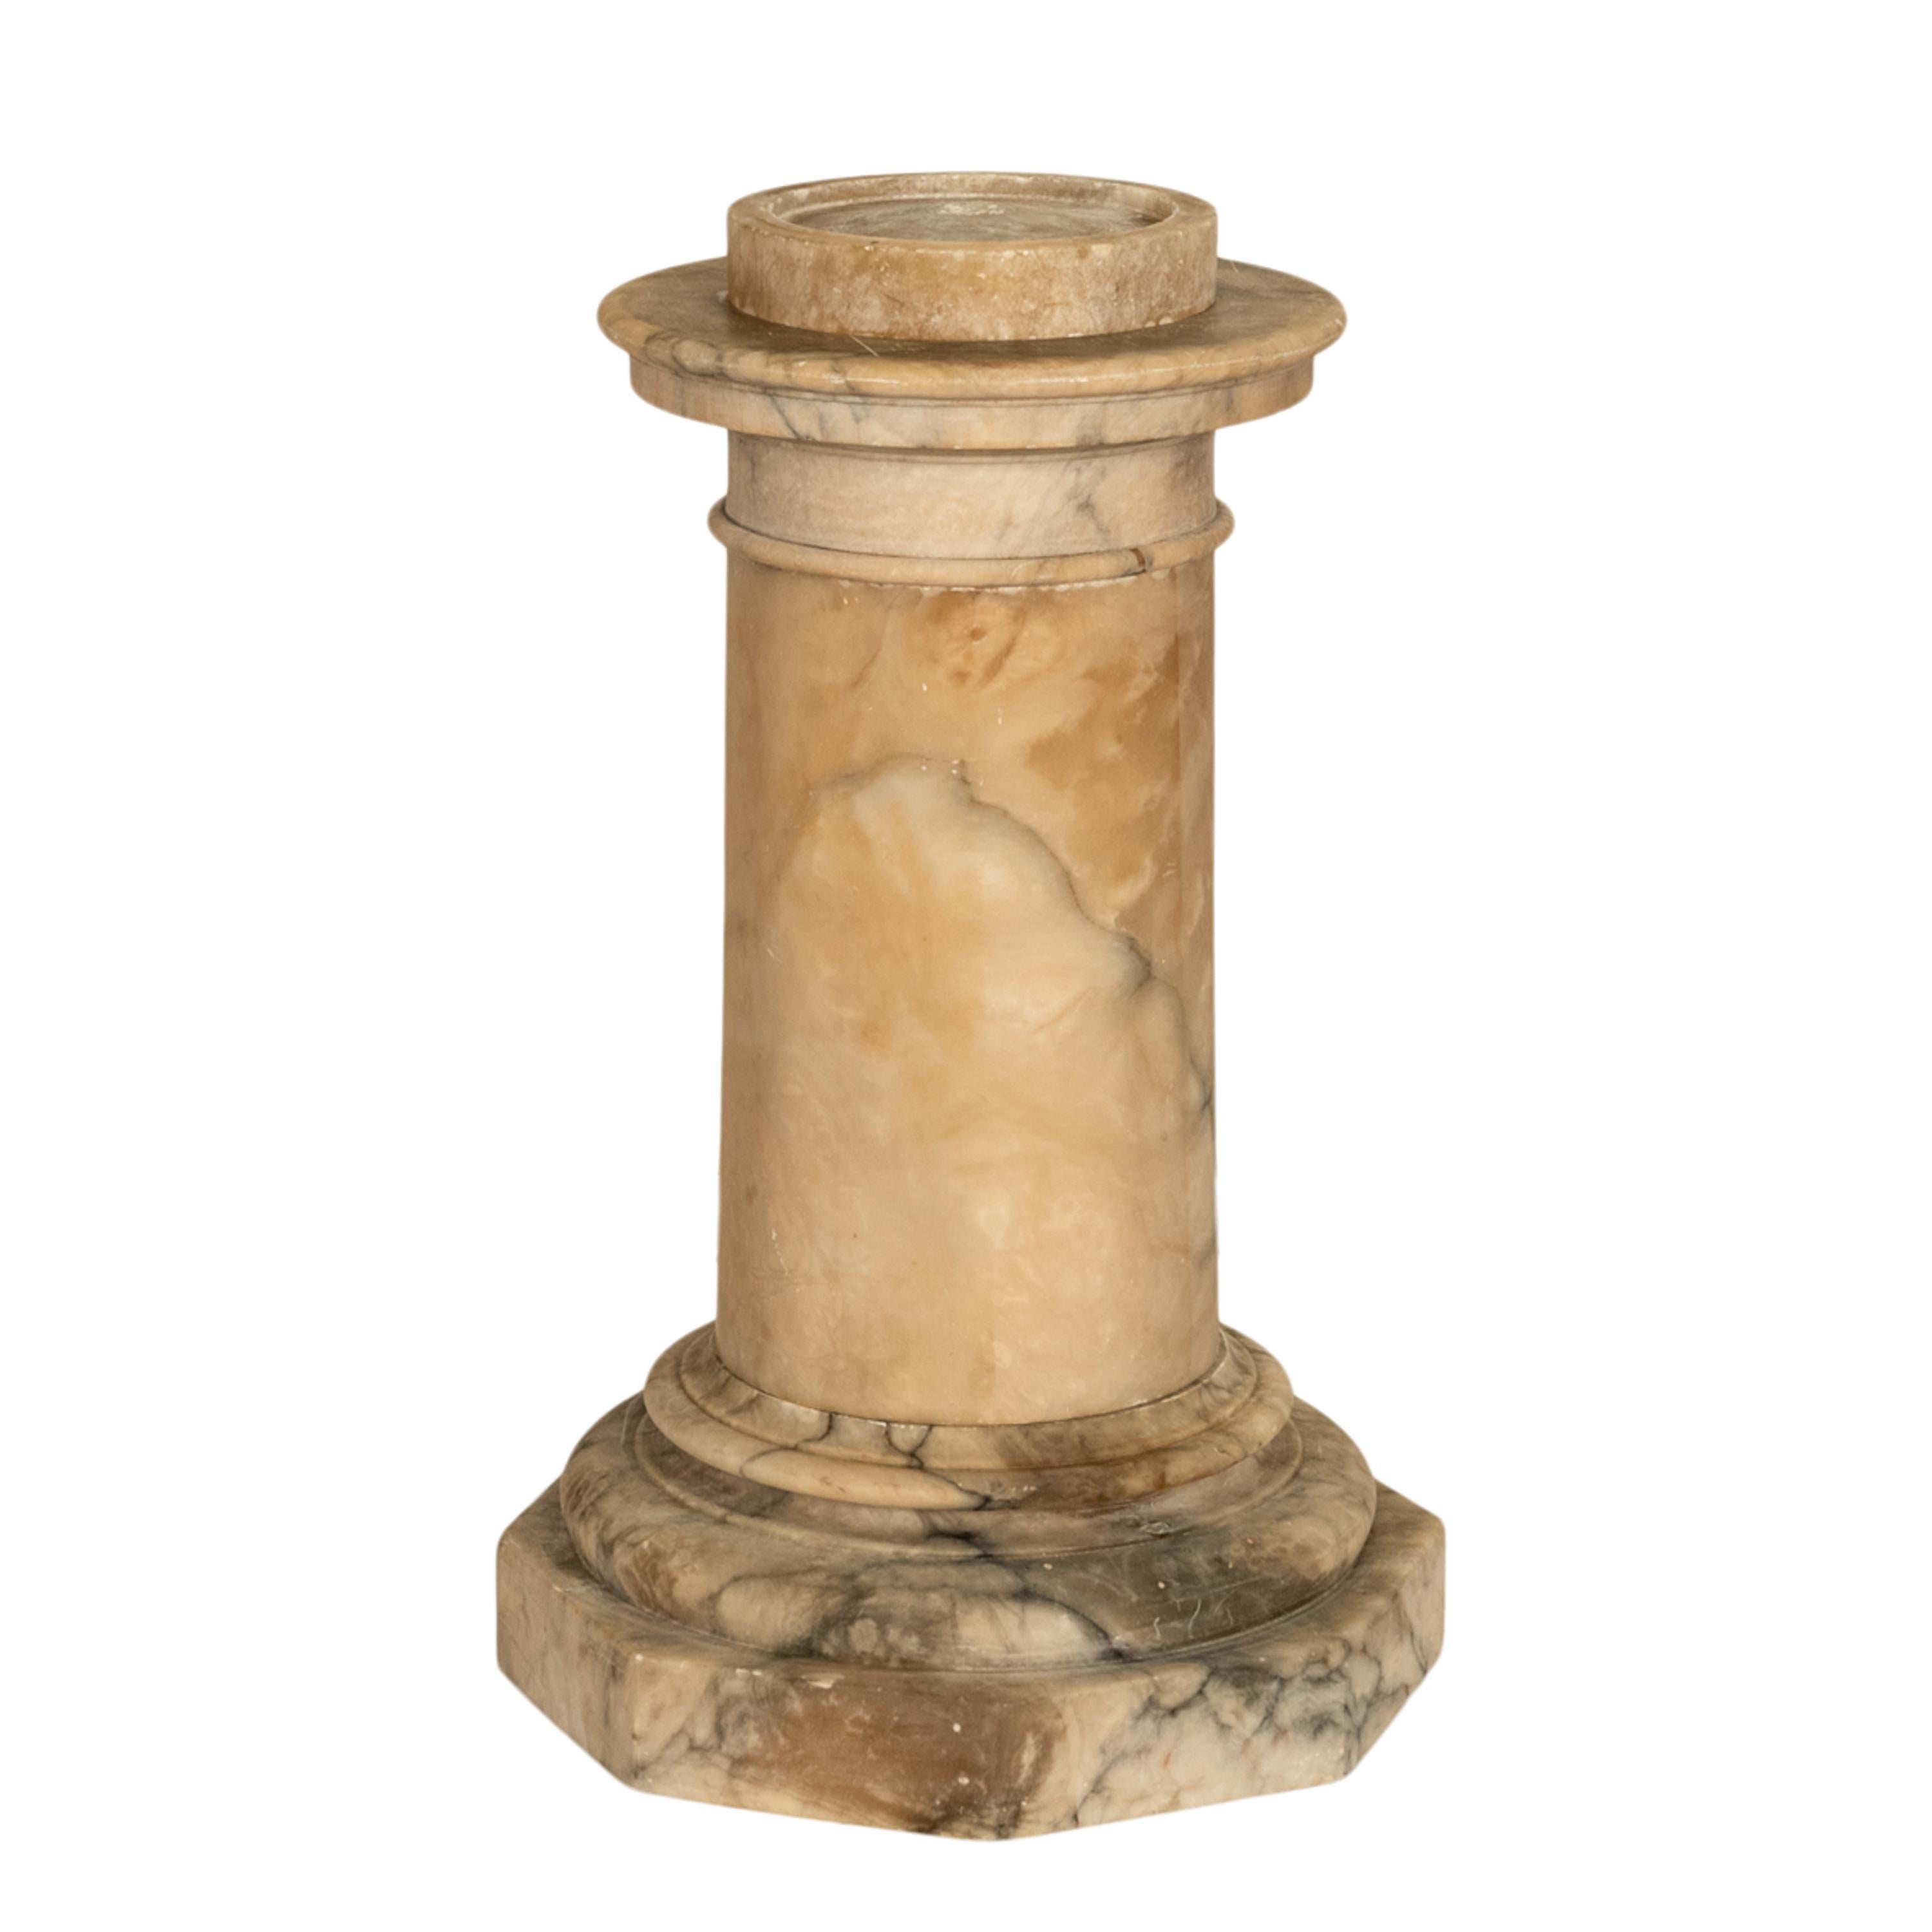 Antique 19th Century Italian Carved Alabaster Neoclassical Urn on Pedestal 1850 For Sale 7